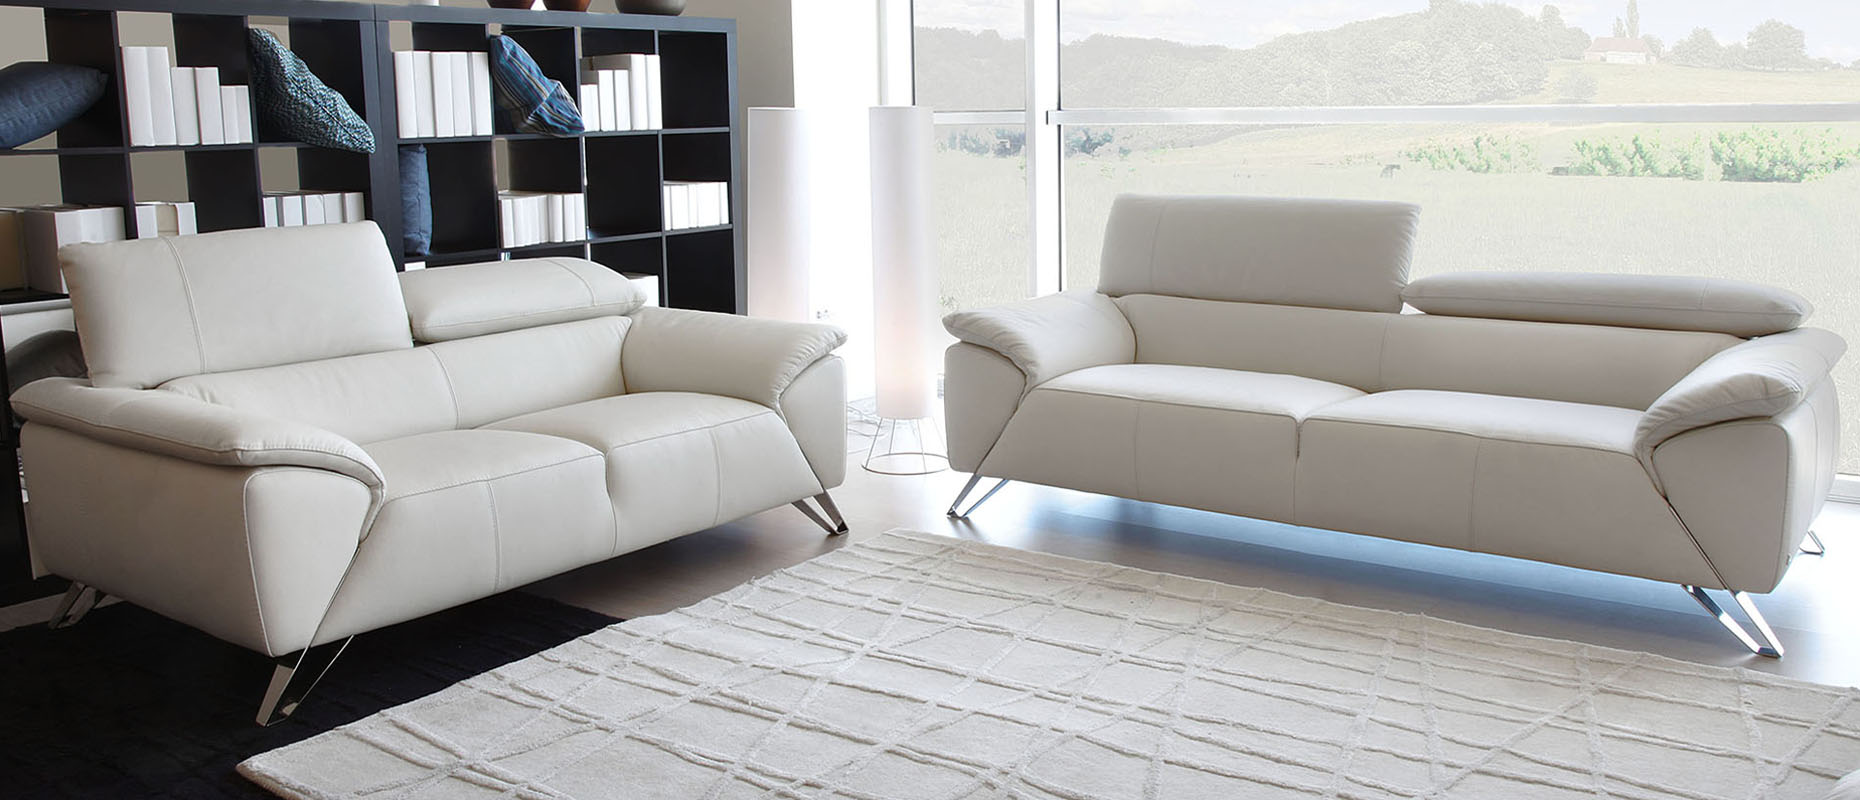 Puccini Sofa collection at Forrest Furnishing